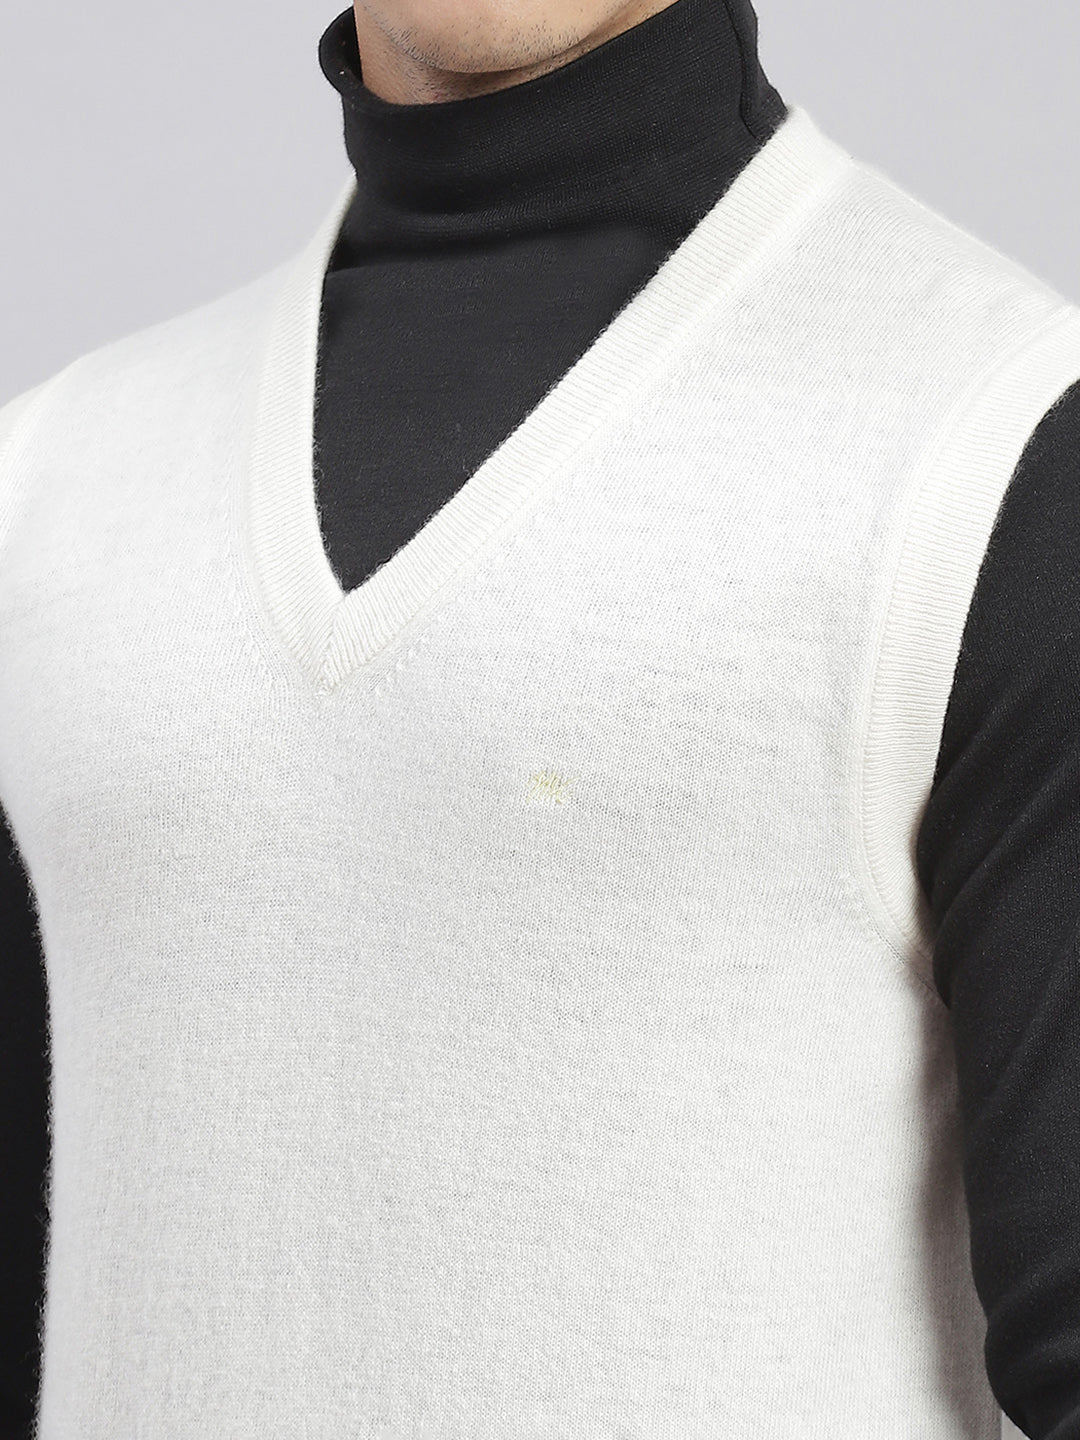 Men White Solid V Neck Sleeveless Sweaters/Pullovers